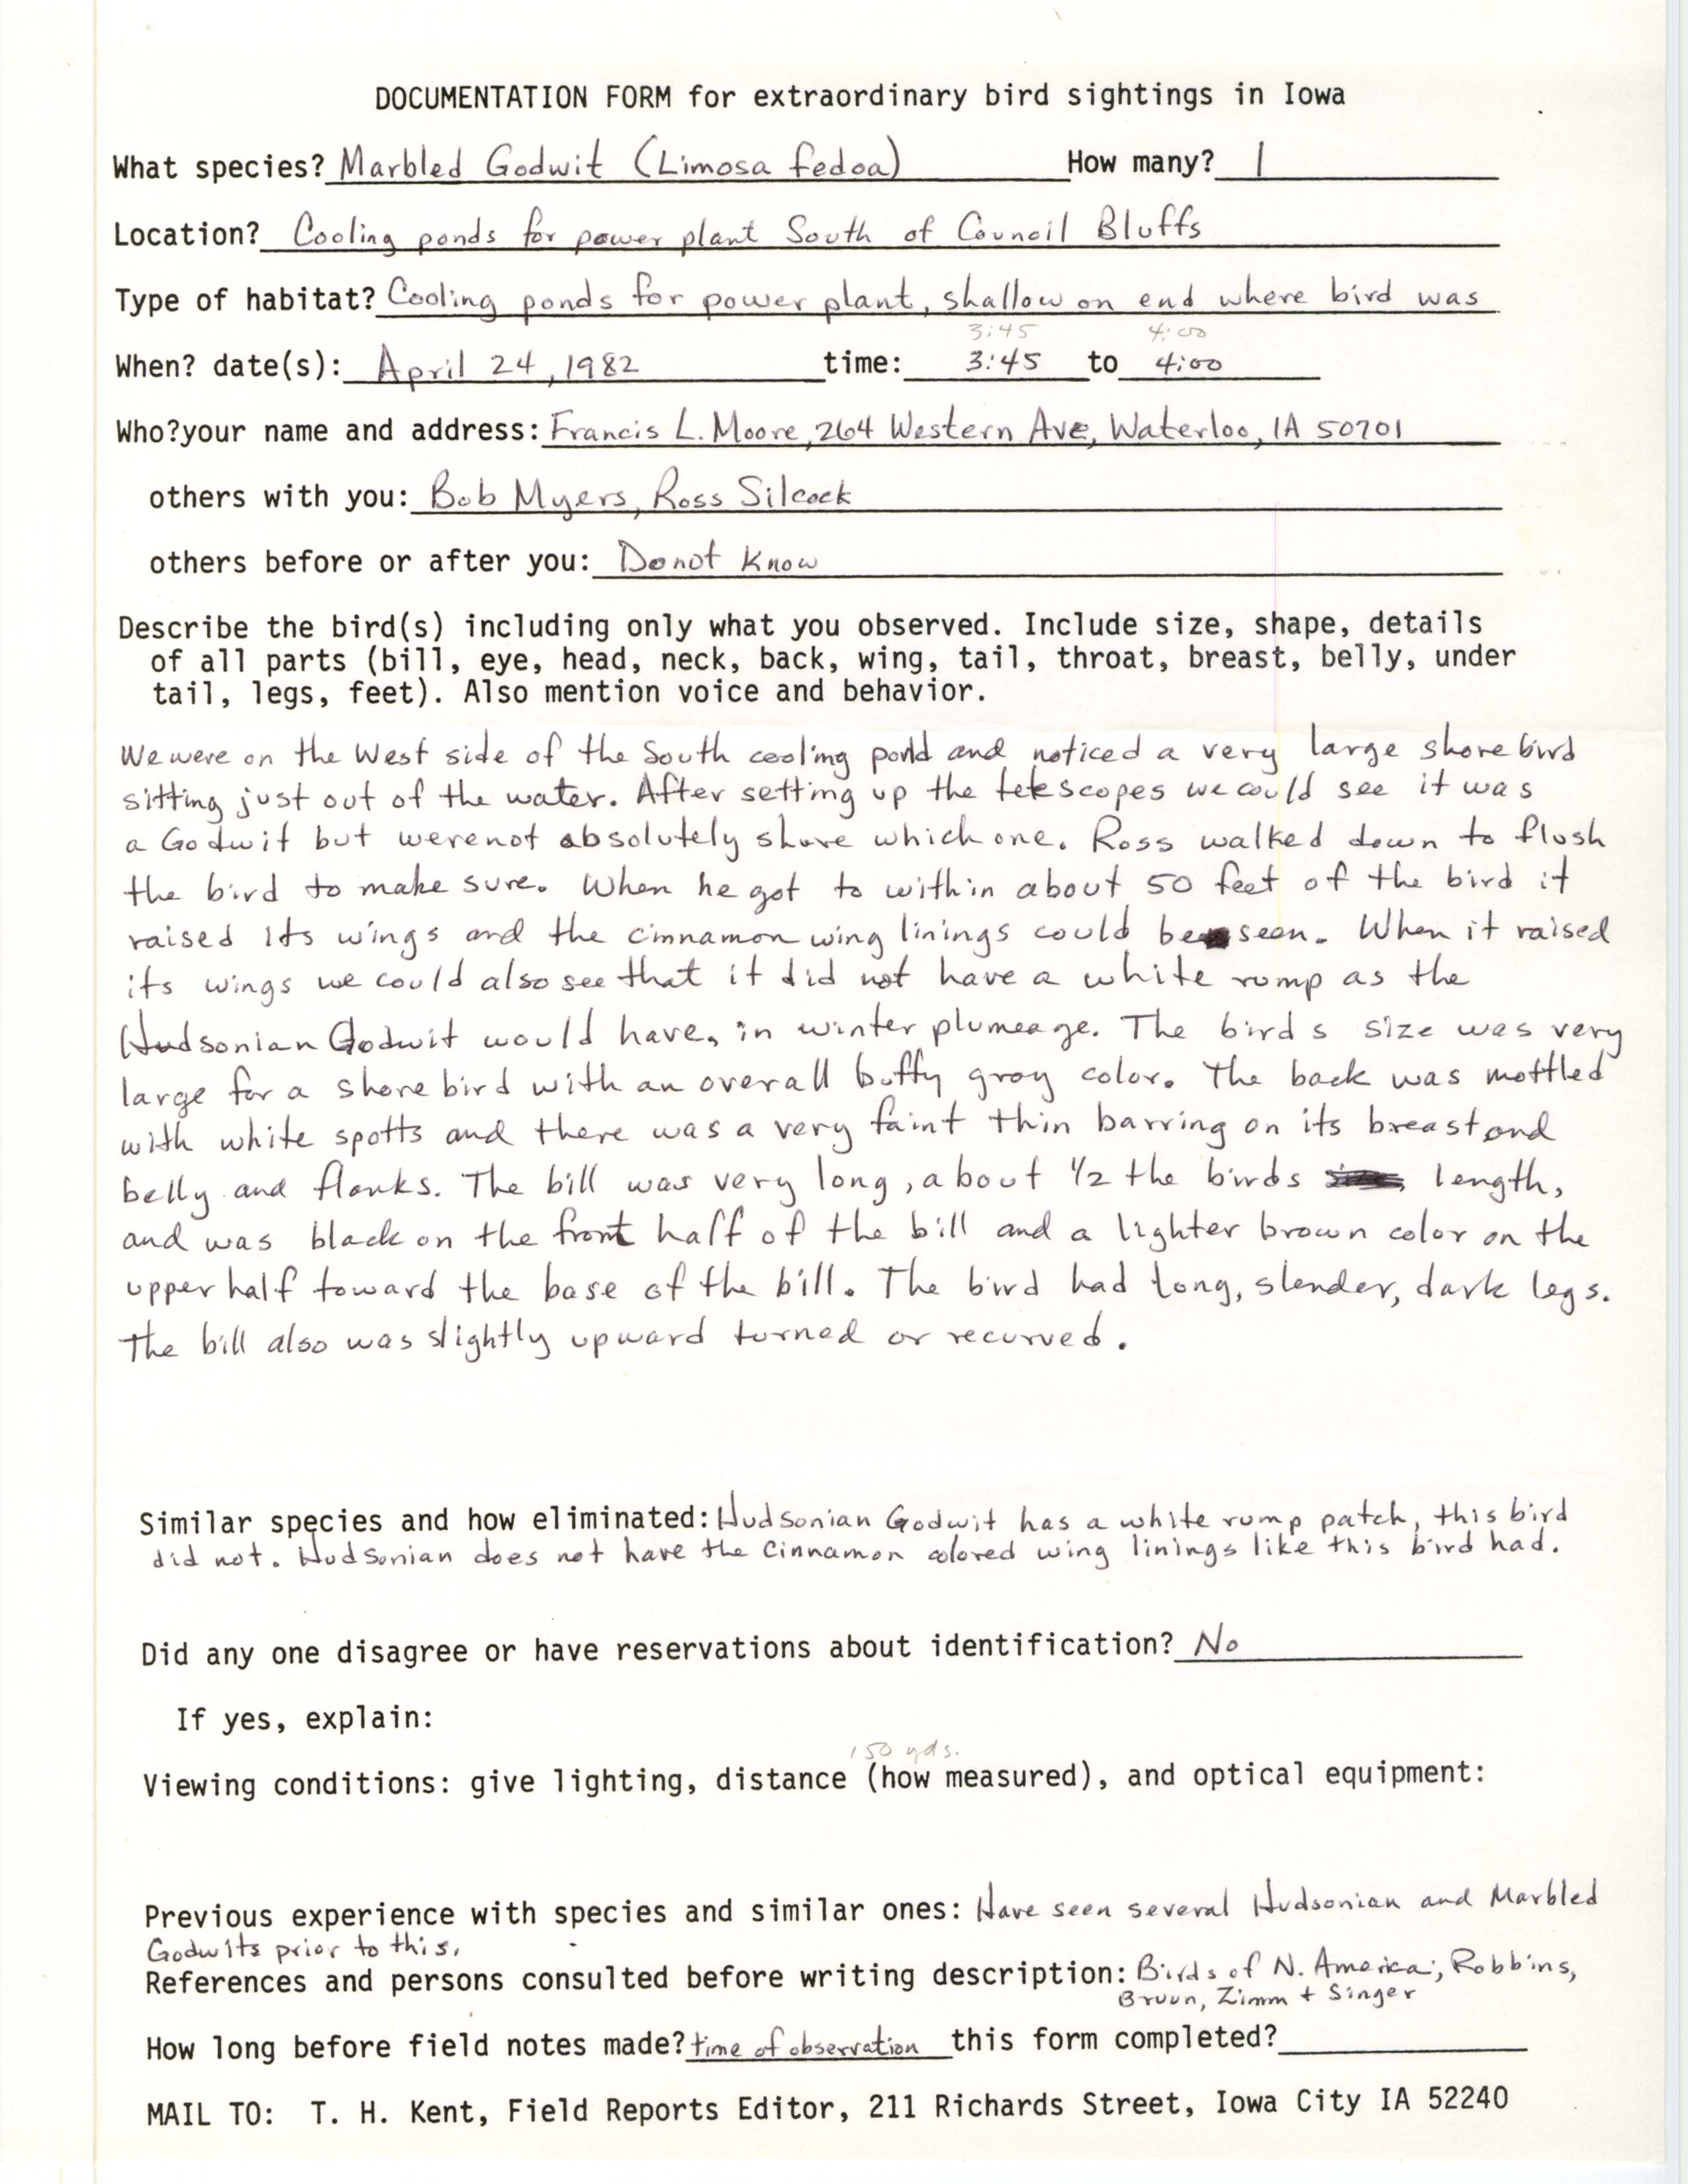 Rare bird documentation form for Marbled Godwit at MidAmerican Energy Ponds in 1982